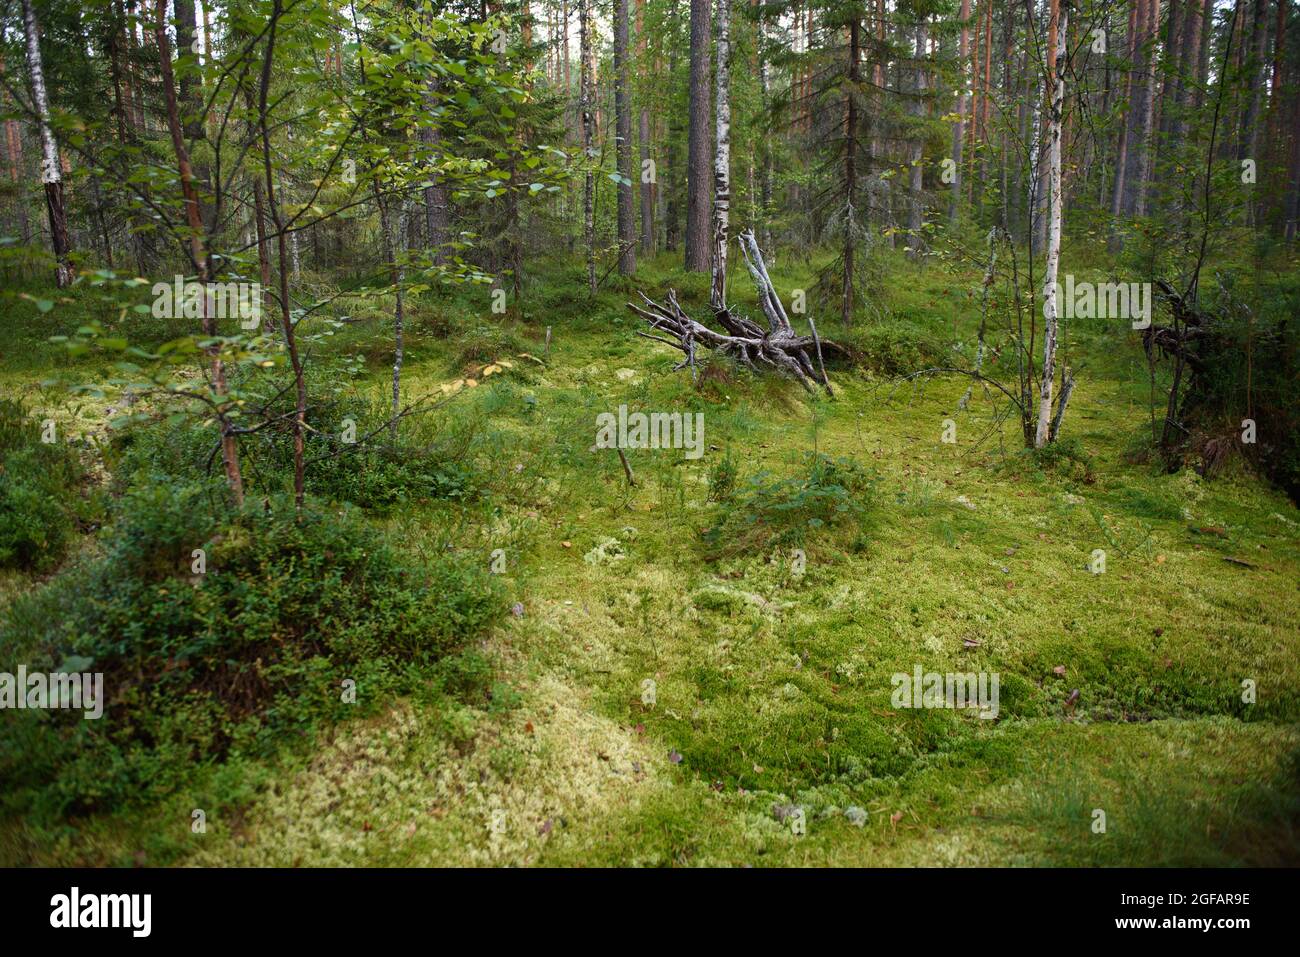 Landscape. A swampy area in the northern forest. Stock Photo